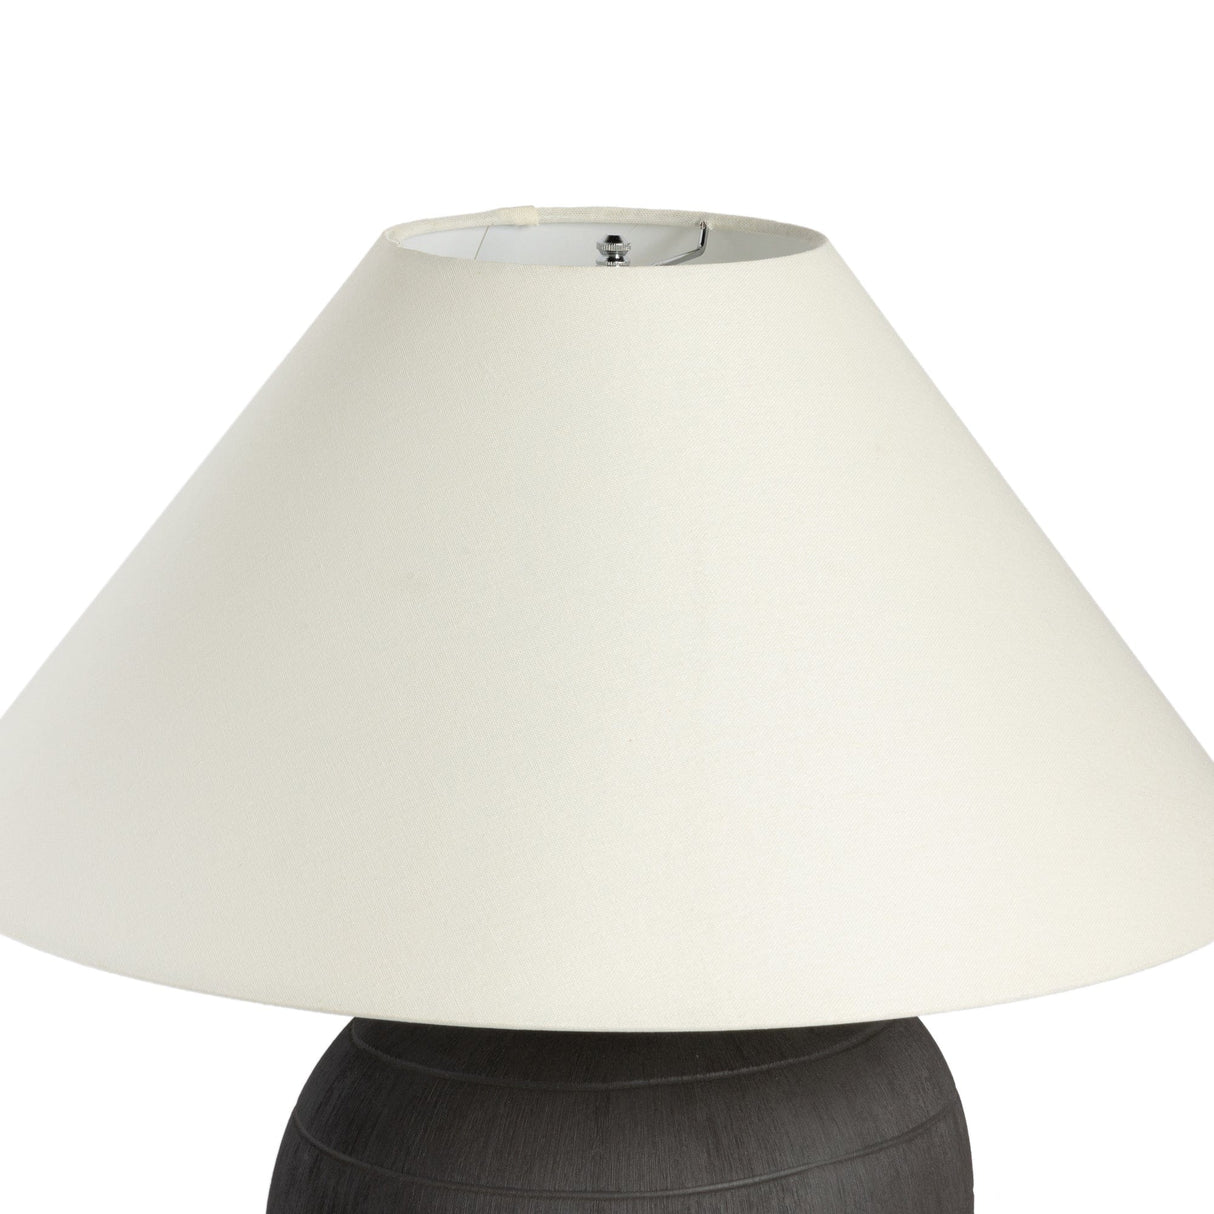 Four Hands Muji Table Lamp Lighting four-hands-232315-001 801542843328